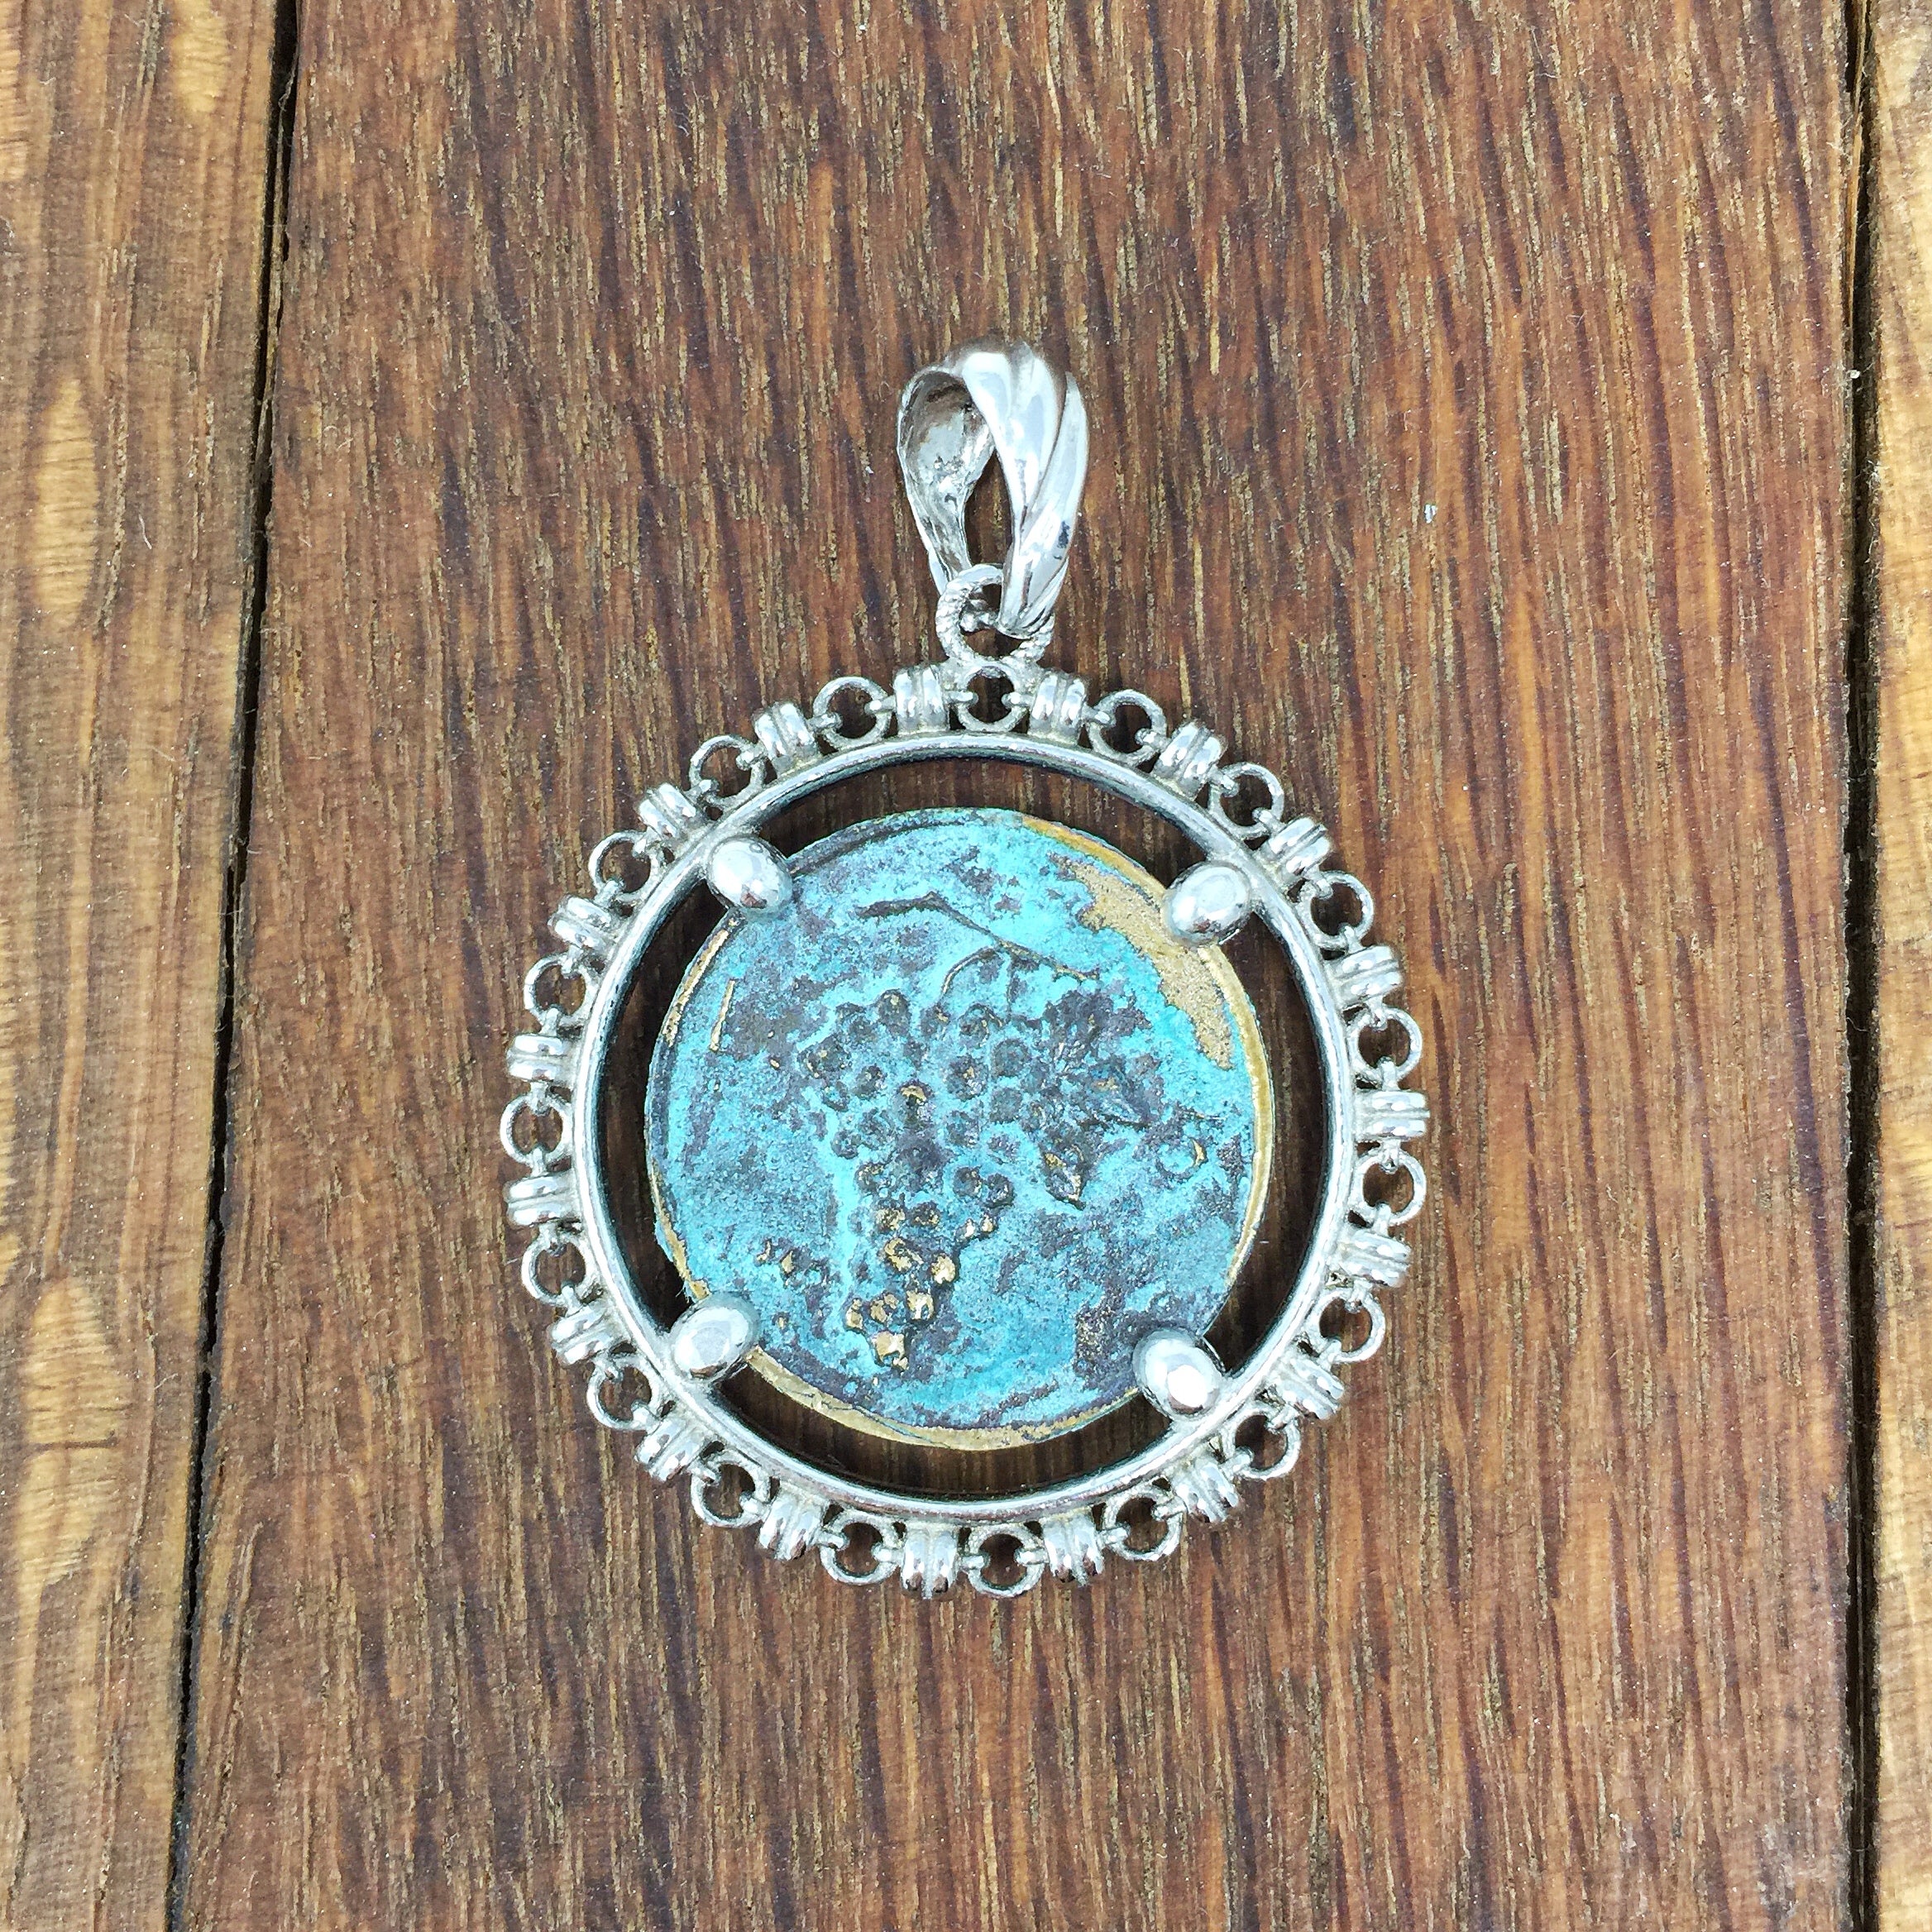 Filary Pendant in Silver with Grapes Coin in Green Patina